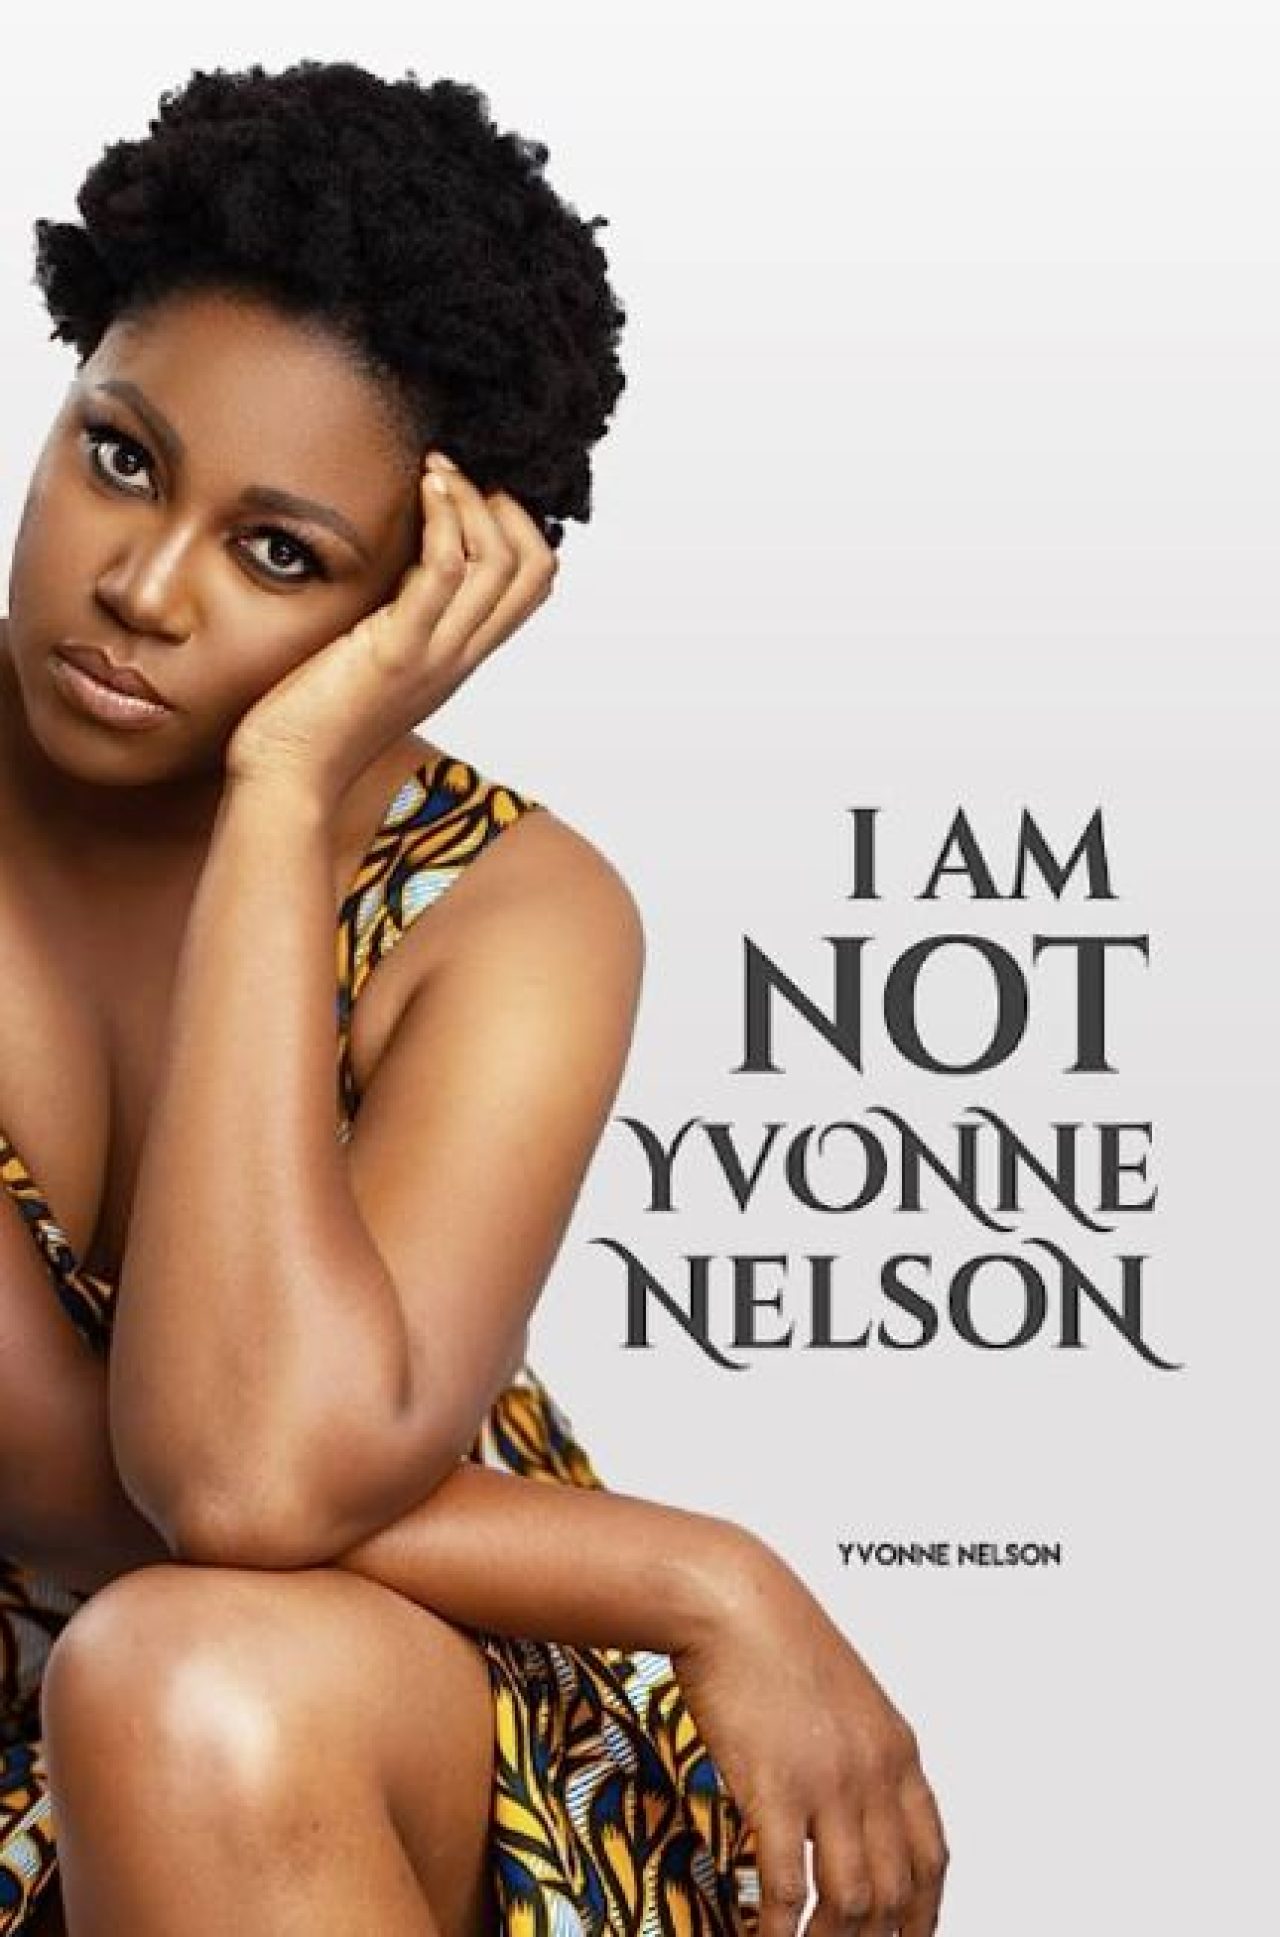 May we not fornicate with people who will write books about us - Ghanaians comment on Yvonne Nelson's Memoir. AdvertAfrica News on afronewswire.com: Amplifying Africa's Voice | afronewswire.com | Breaking News & Stories